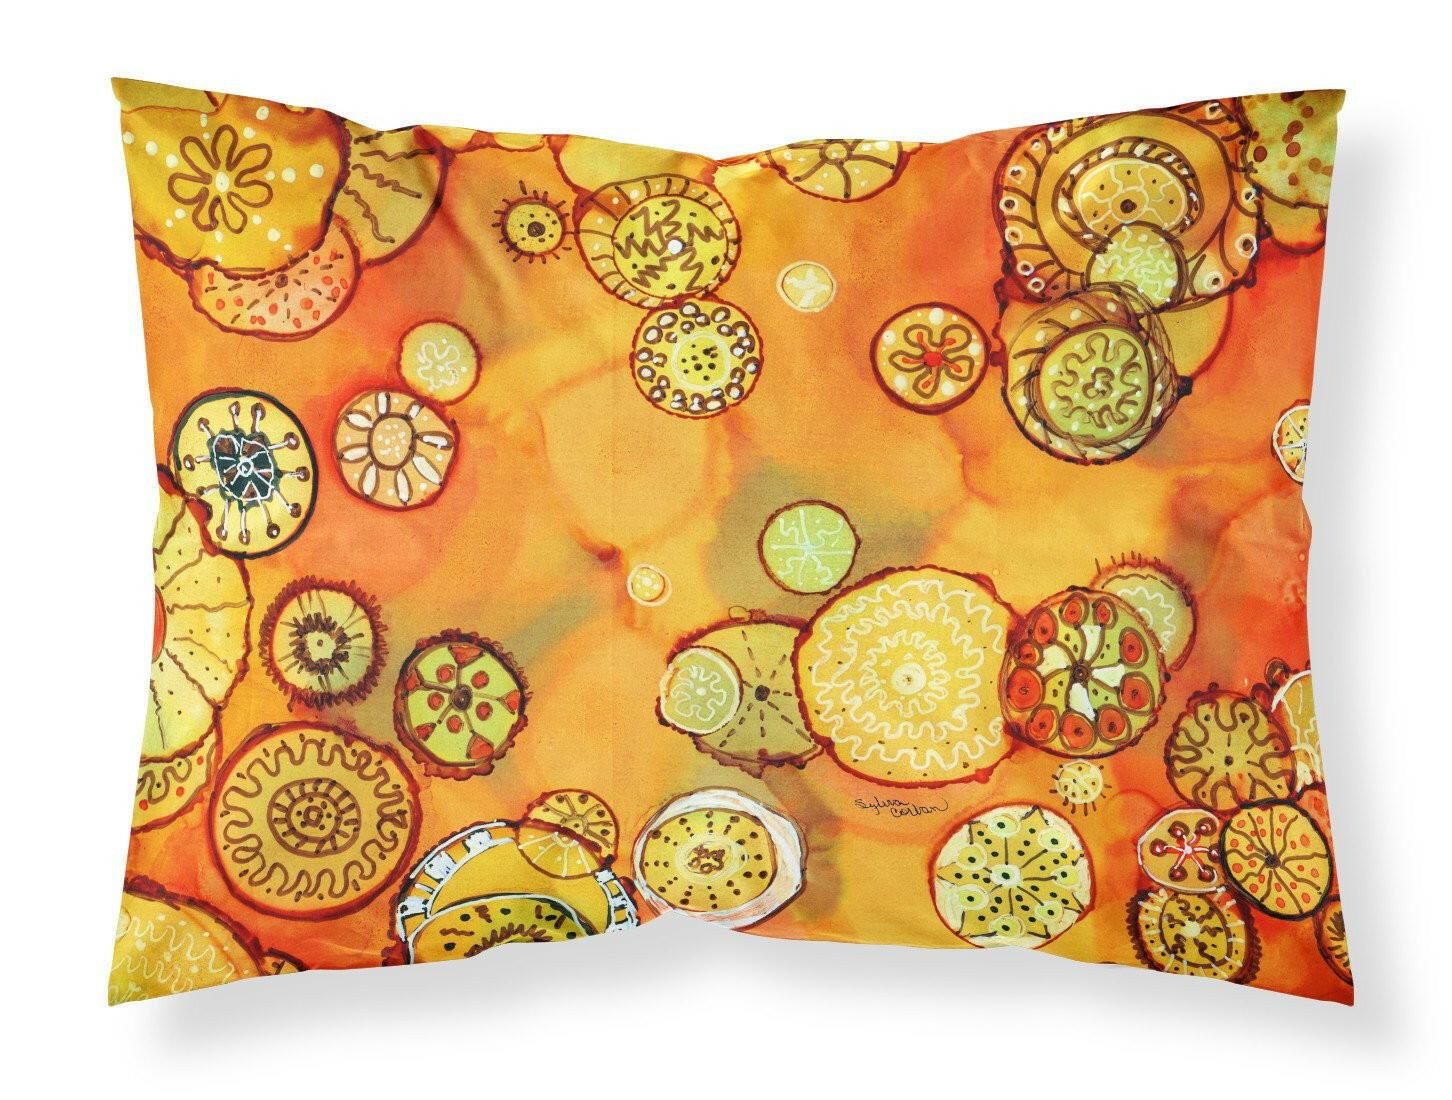 Abstract Flowers in Oranges and Yellows Fabric Standard Pillowcase 8987PILLOWCASE by Caroline's Treasures